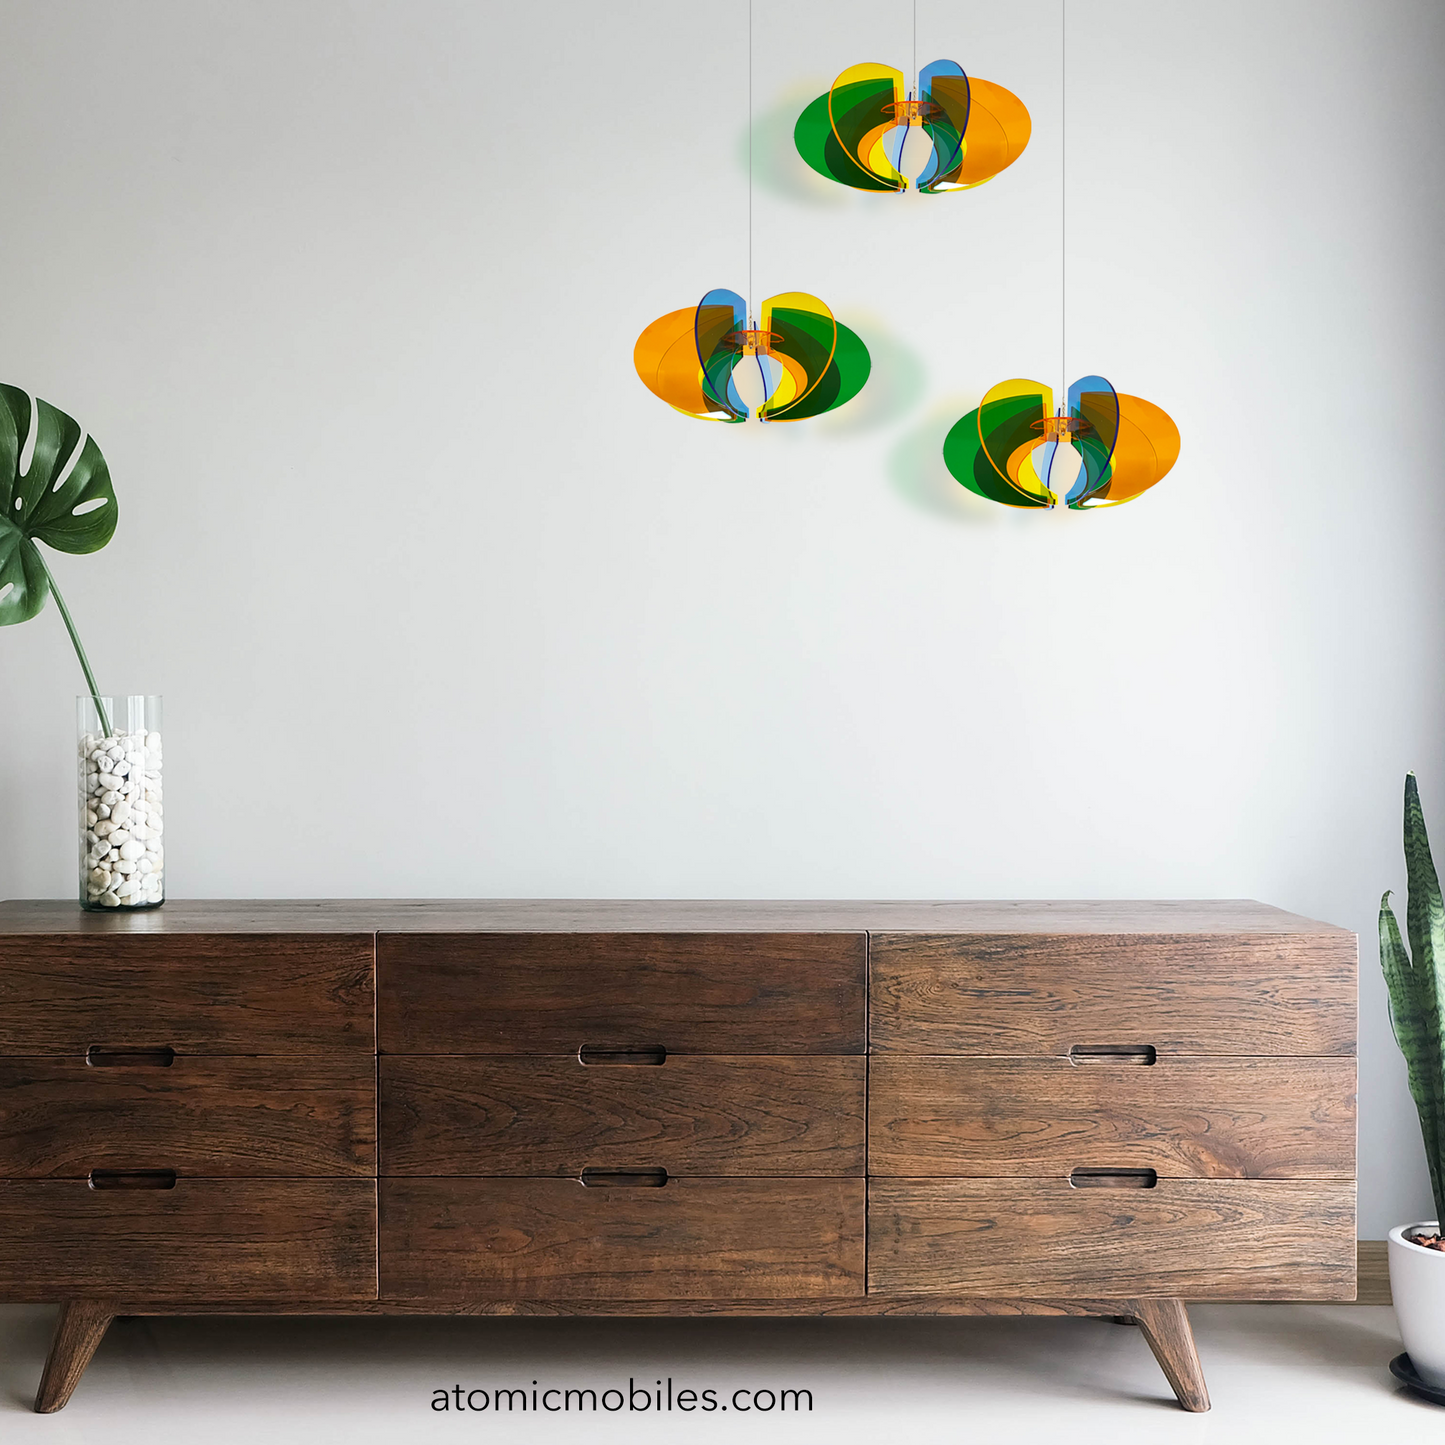 3 Orbit Rotamobiles in mid century modern room with wood credenza sideboard and plants - kinetic hanging art mobiles by AtomicMobiles.com